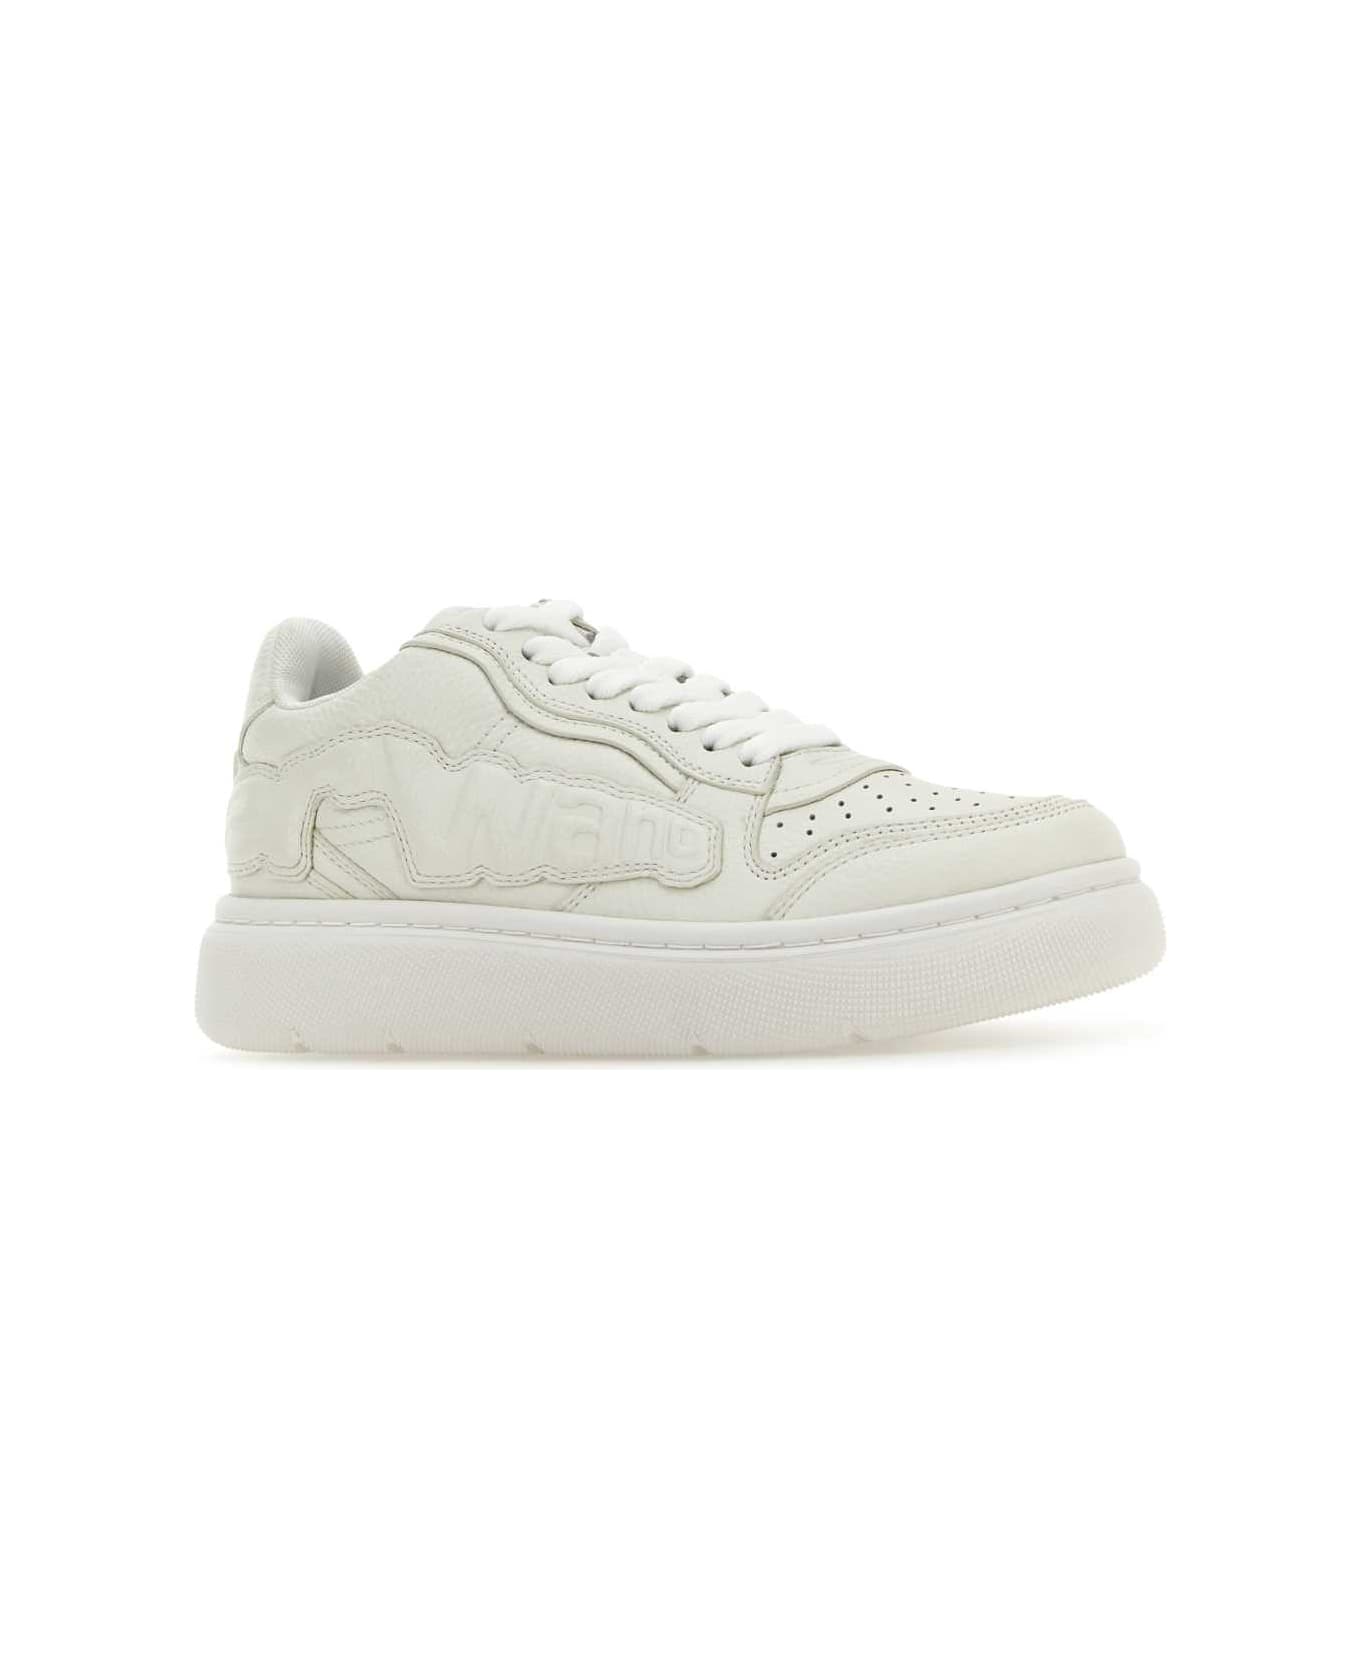 Alexander Wang White Leather Puff Sneakers - OPTICWHITE スニーカー